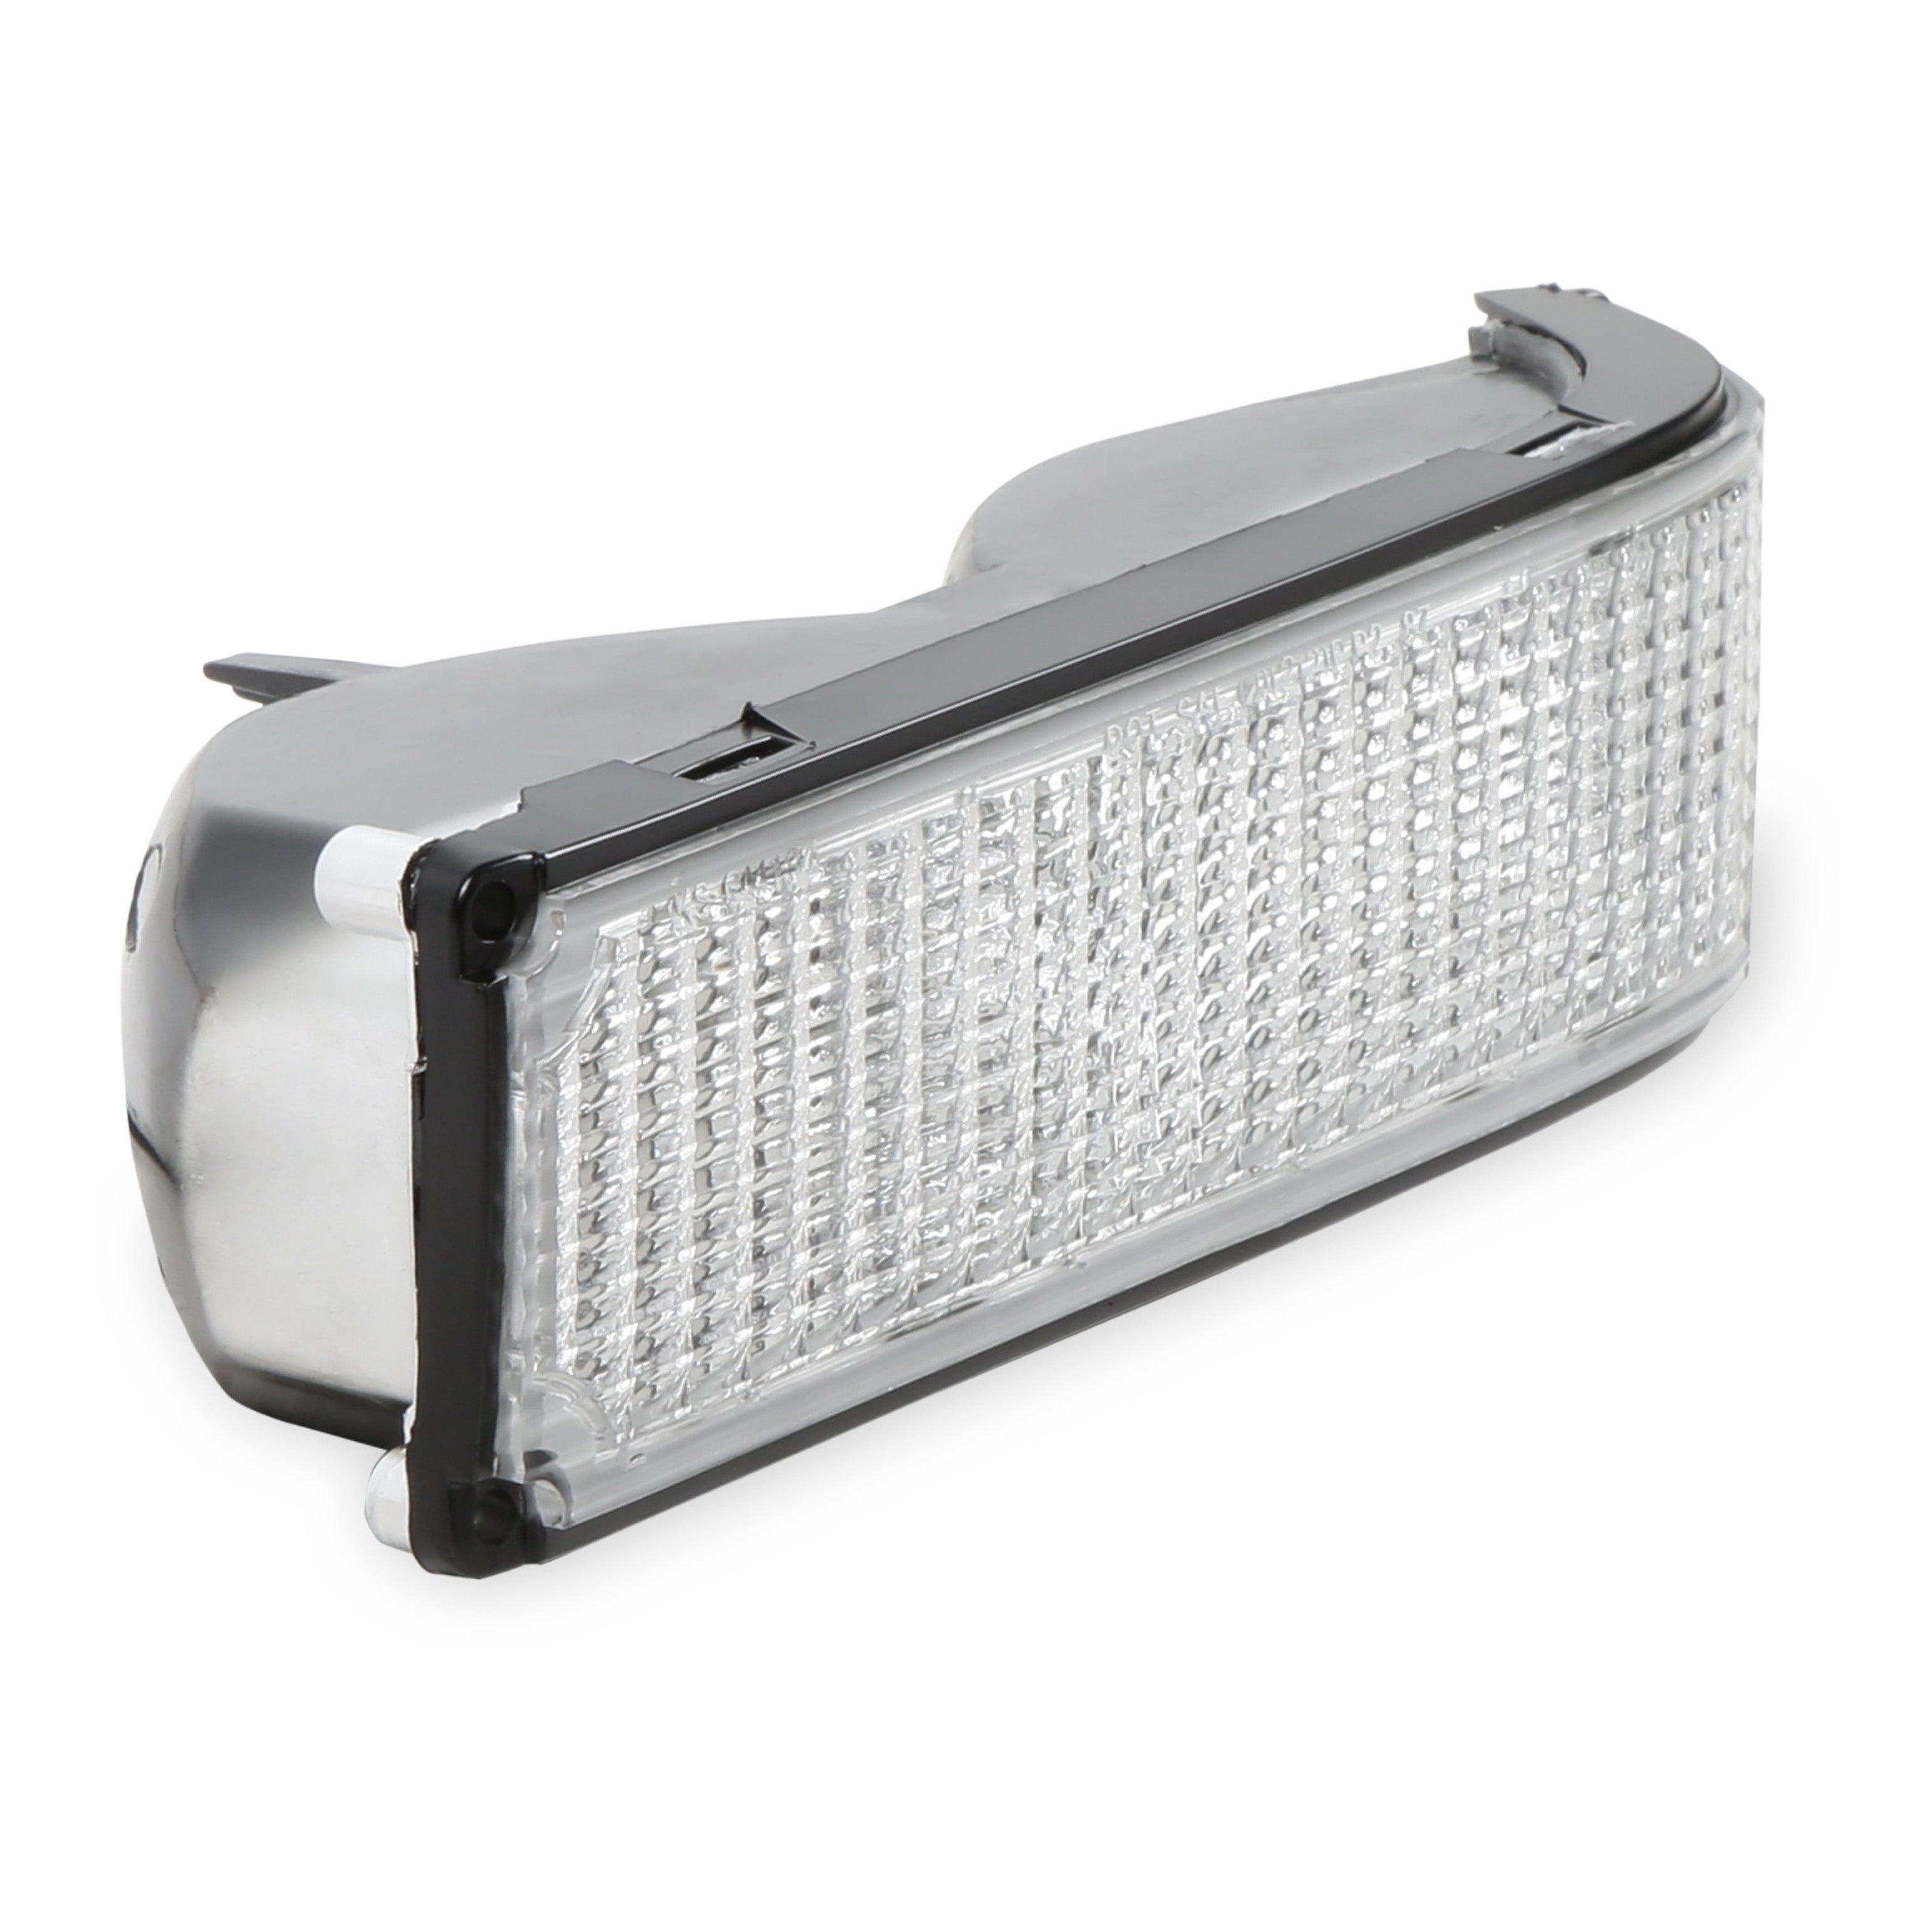 BROTHERS GMT400 Single Headlight Parking Lamp - Clear - LH pn 07-117